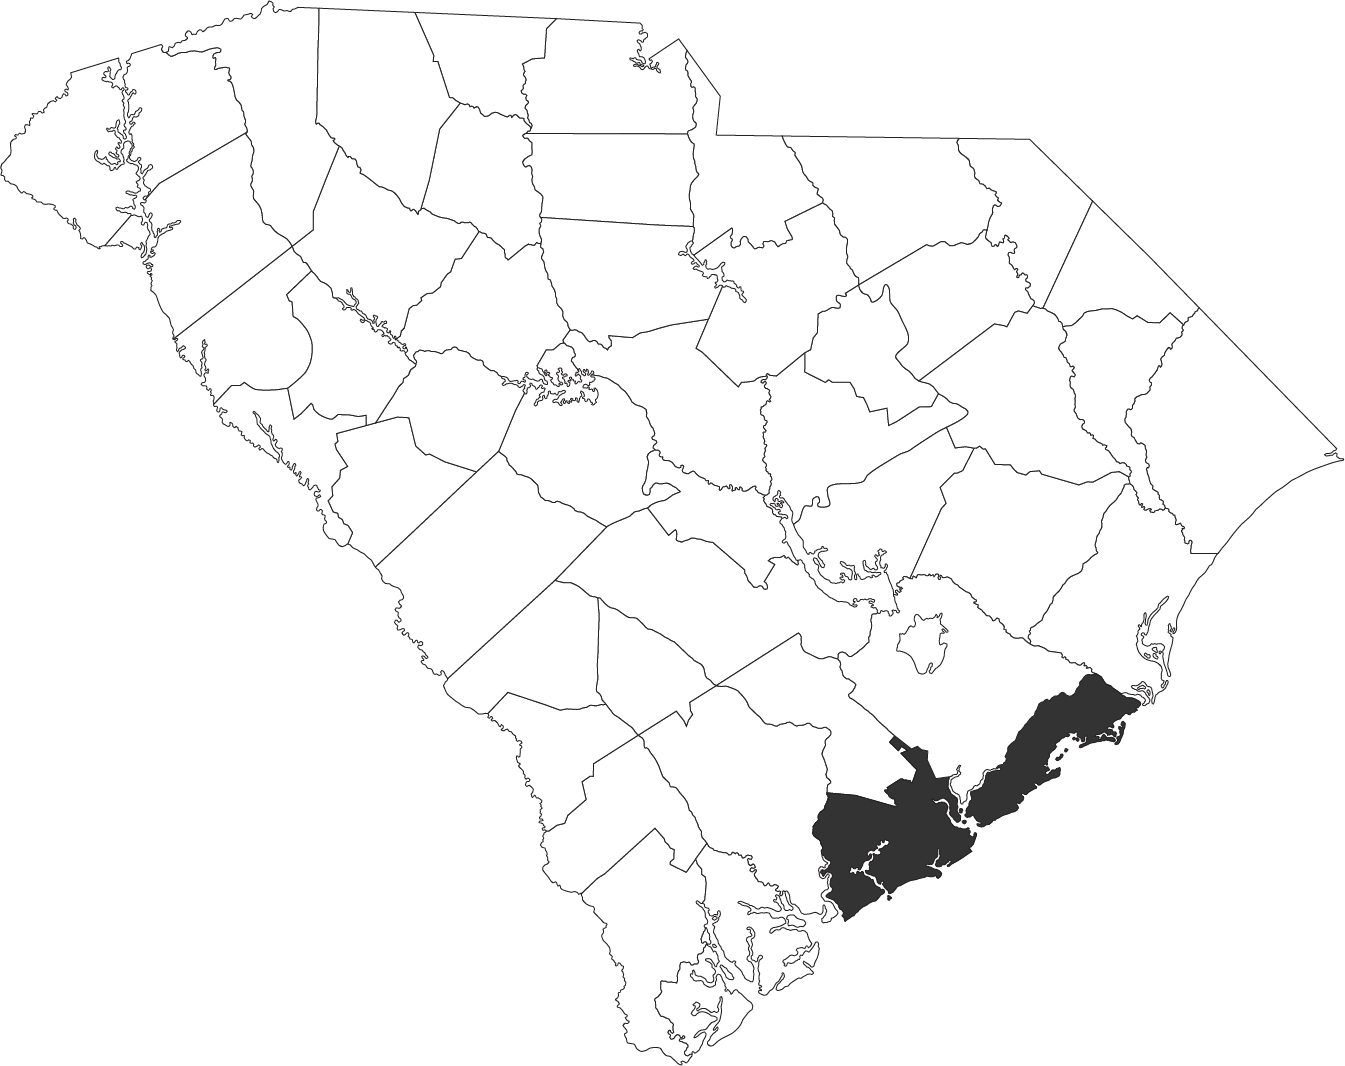 outlined map of south carolina with counties named and Charleston county filled in